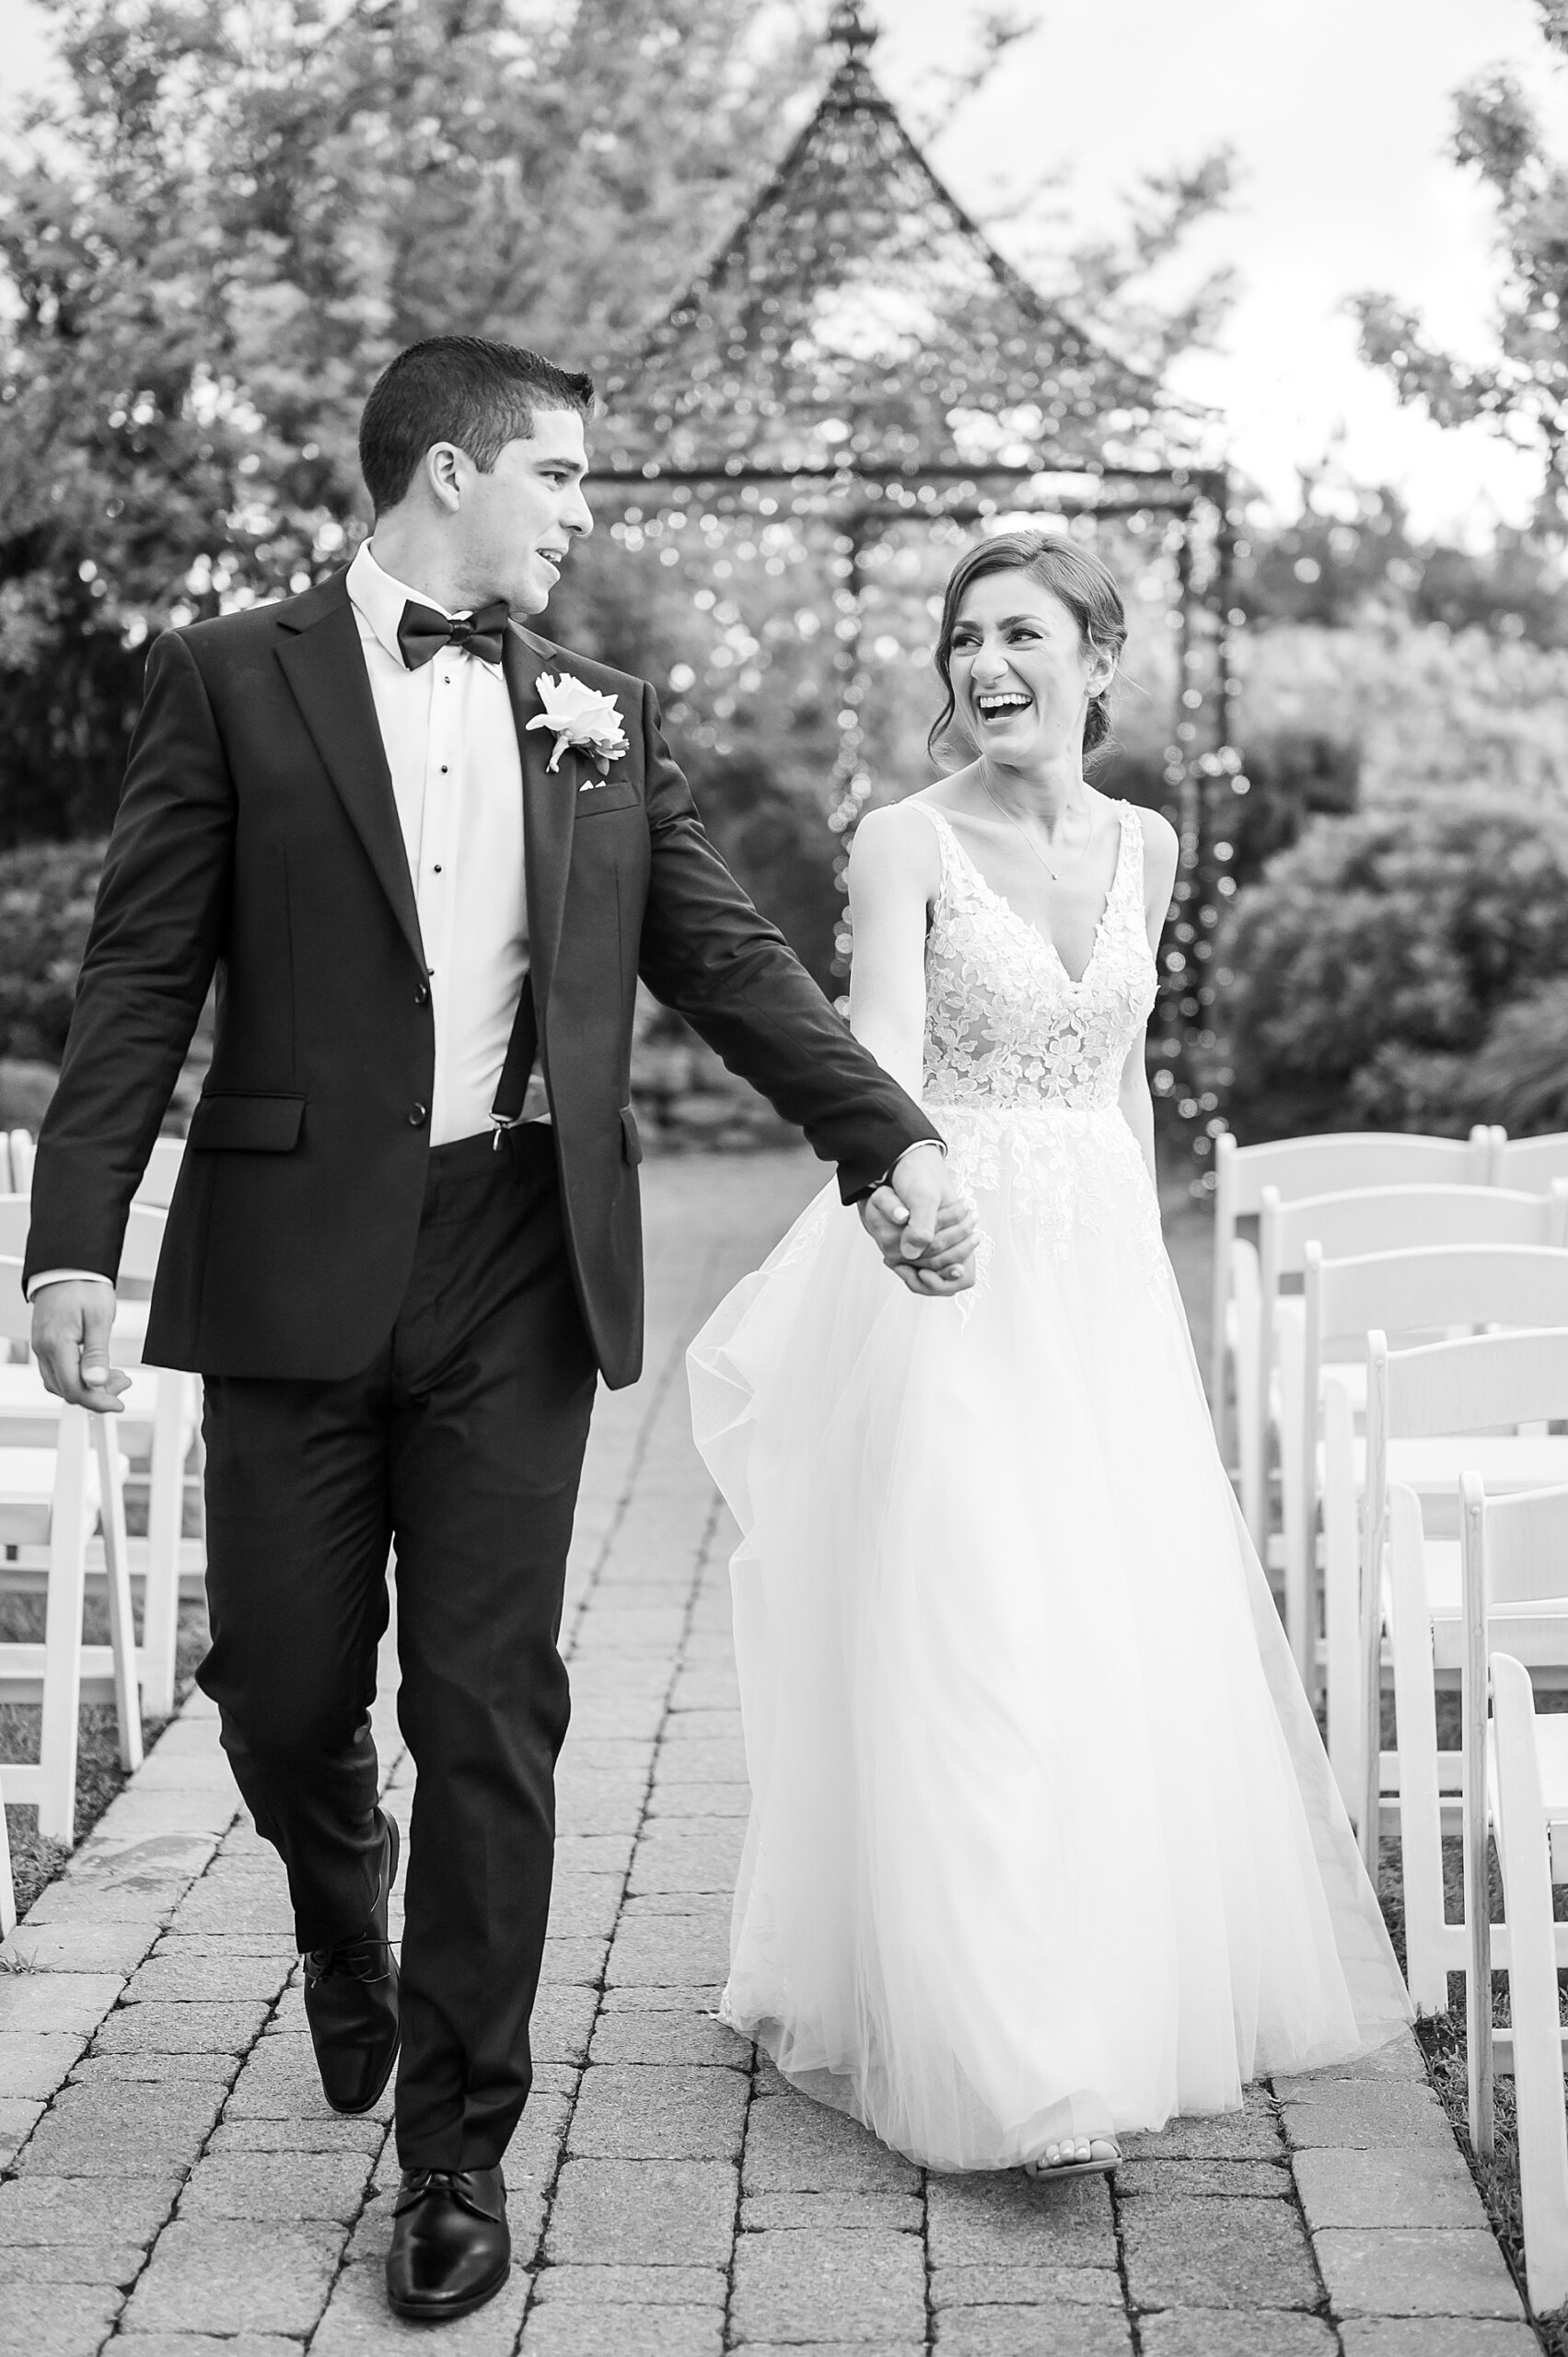 candid wedding portaits photographed by NH wedding photographer Allison Clarke Photography 